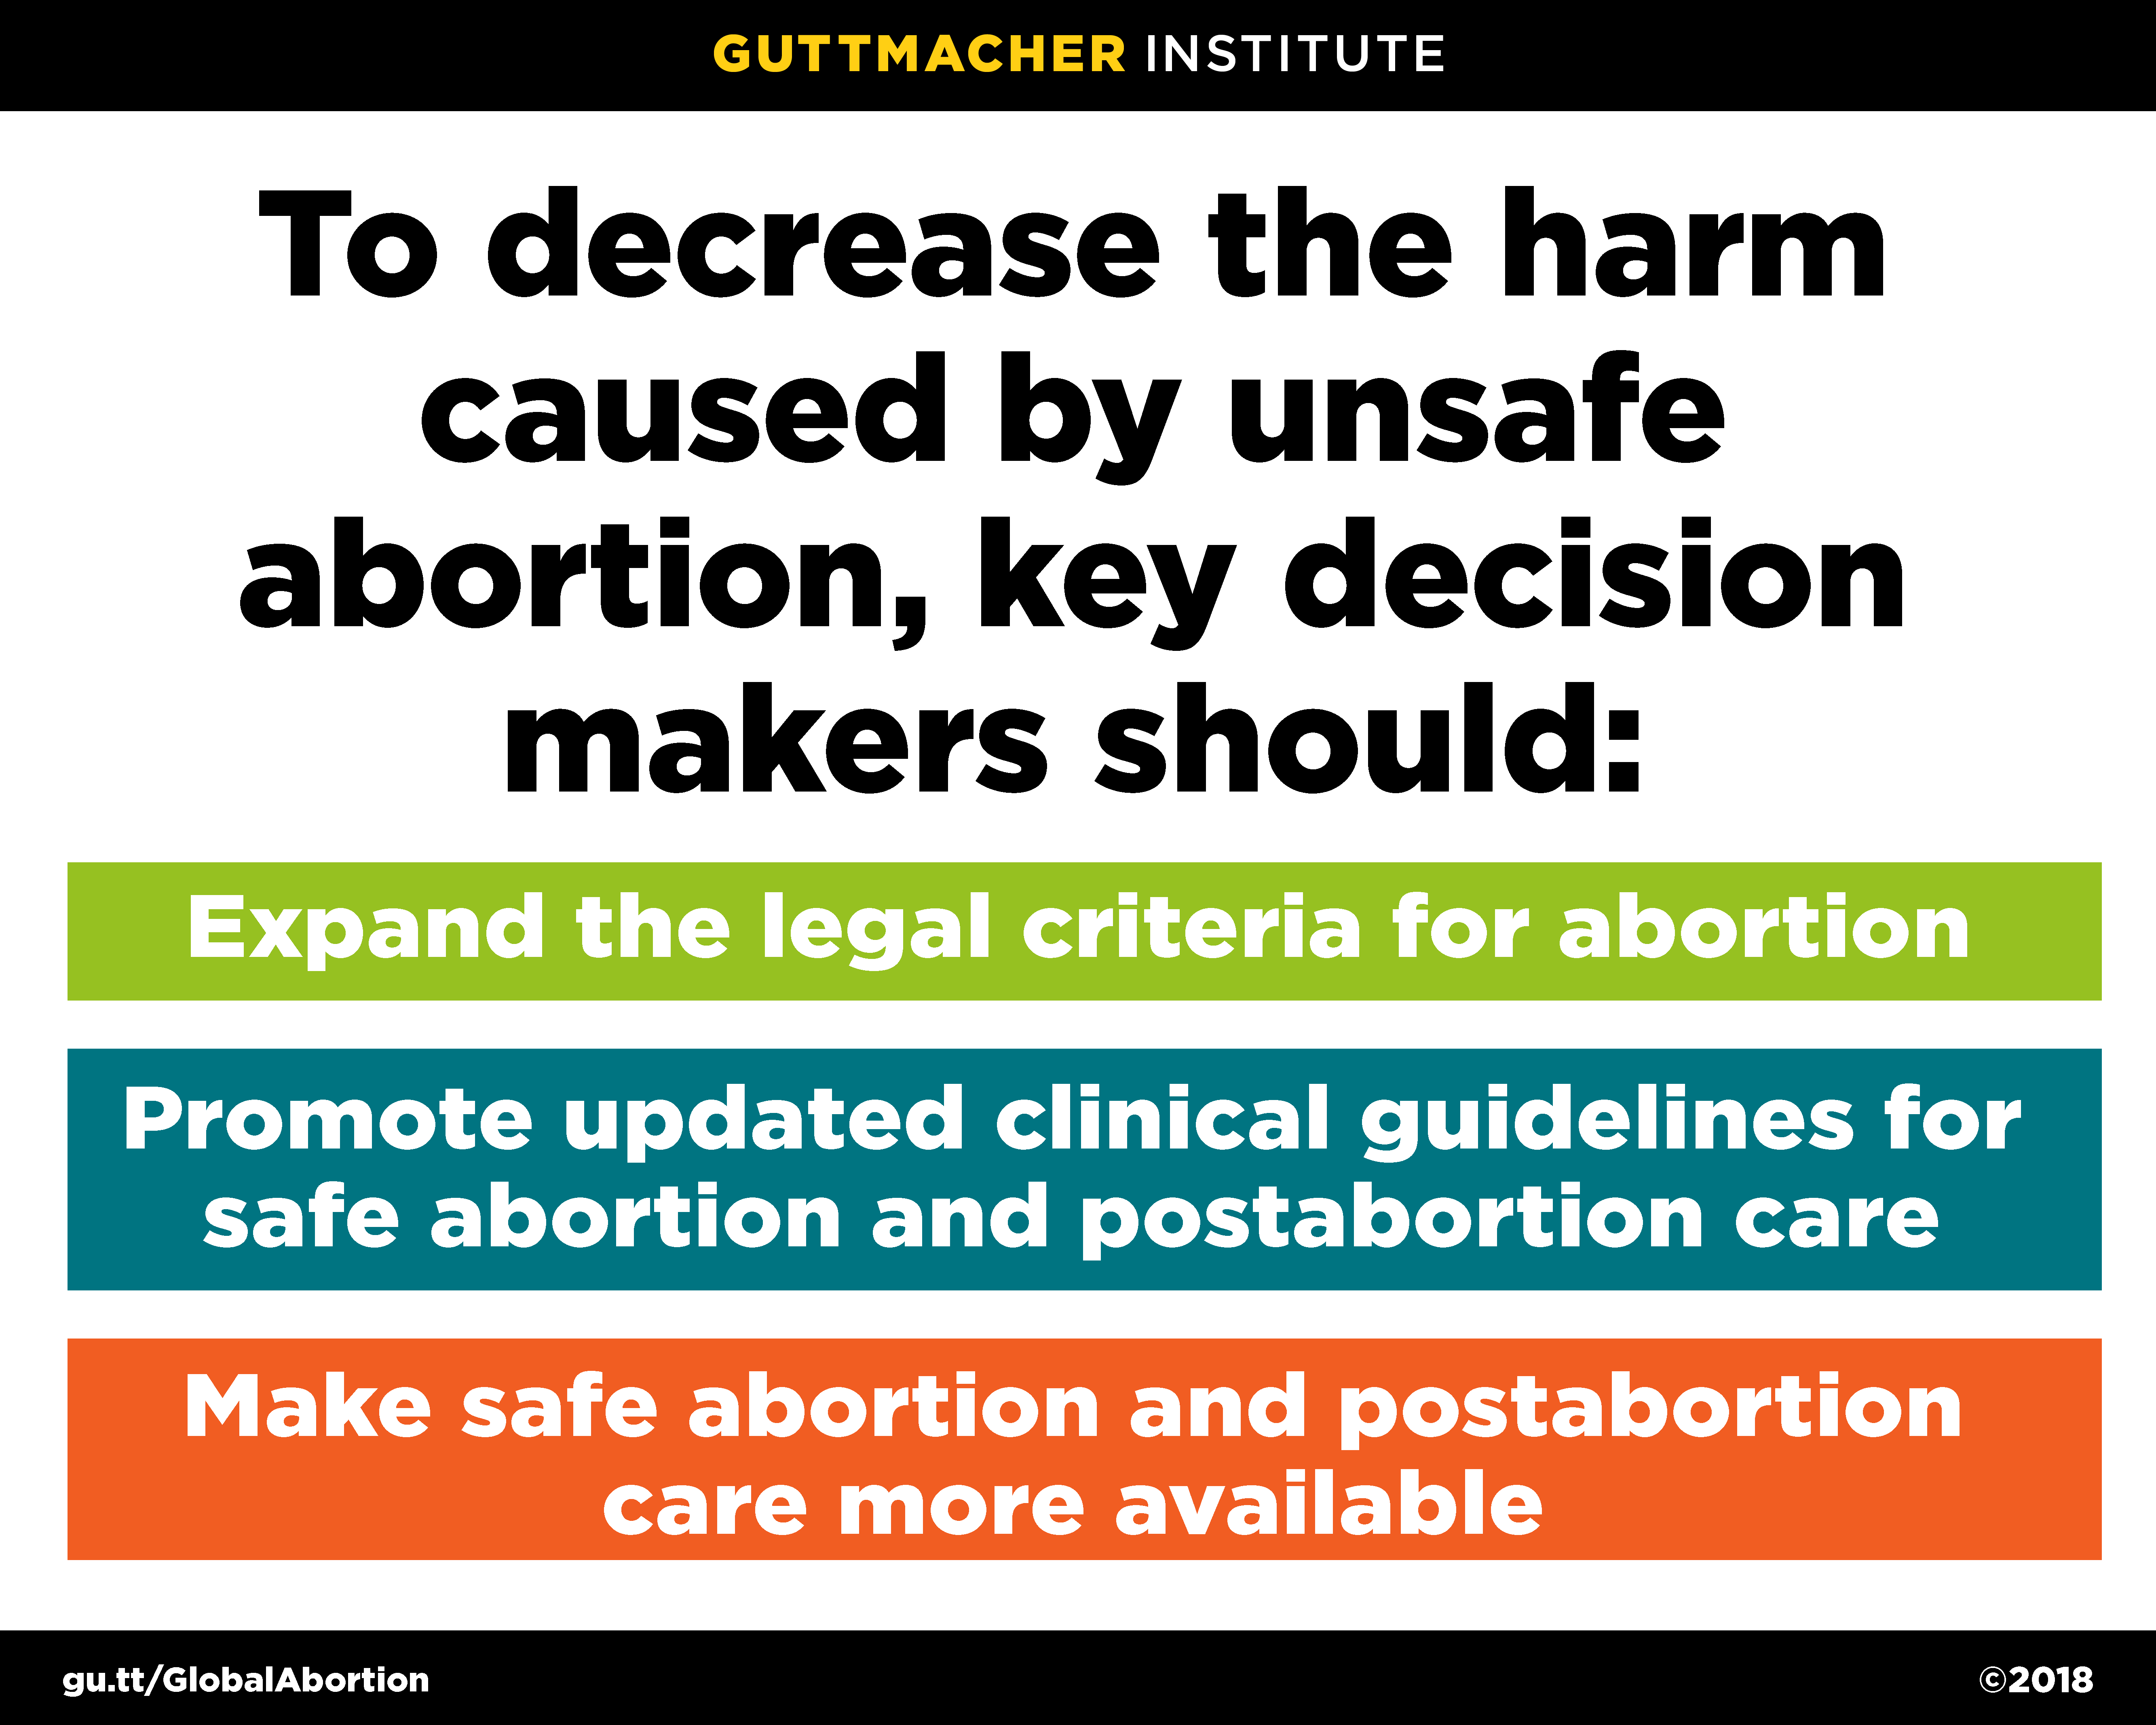 Decision makers should liberalize abortion laws & promote updated clinical guidelines for safe abortion and postabortion care